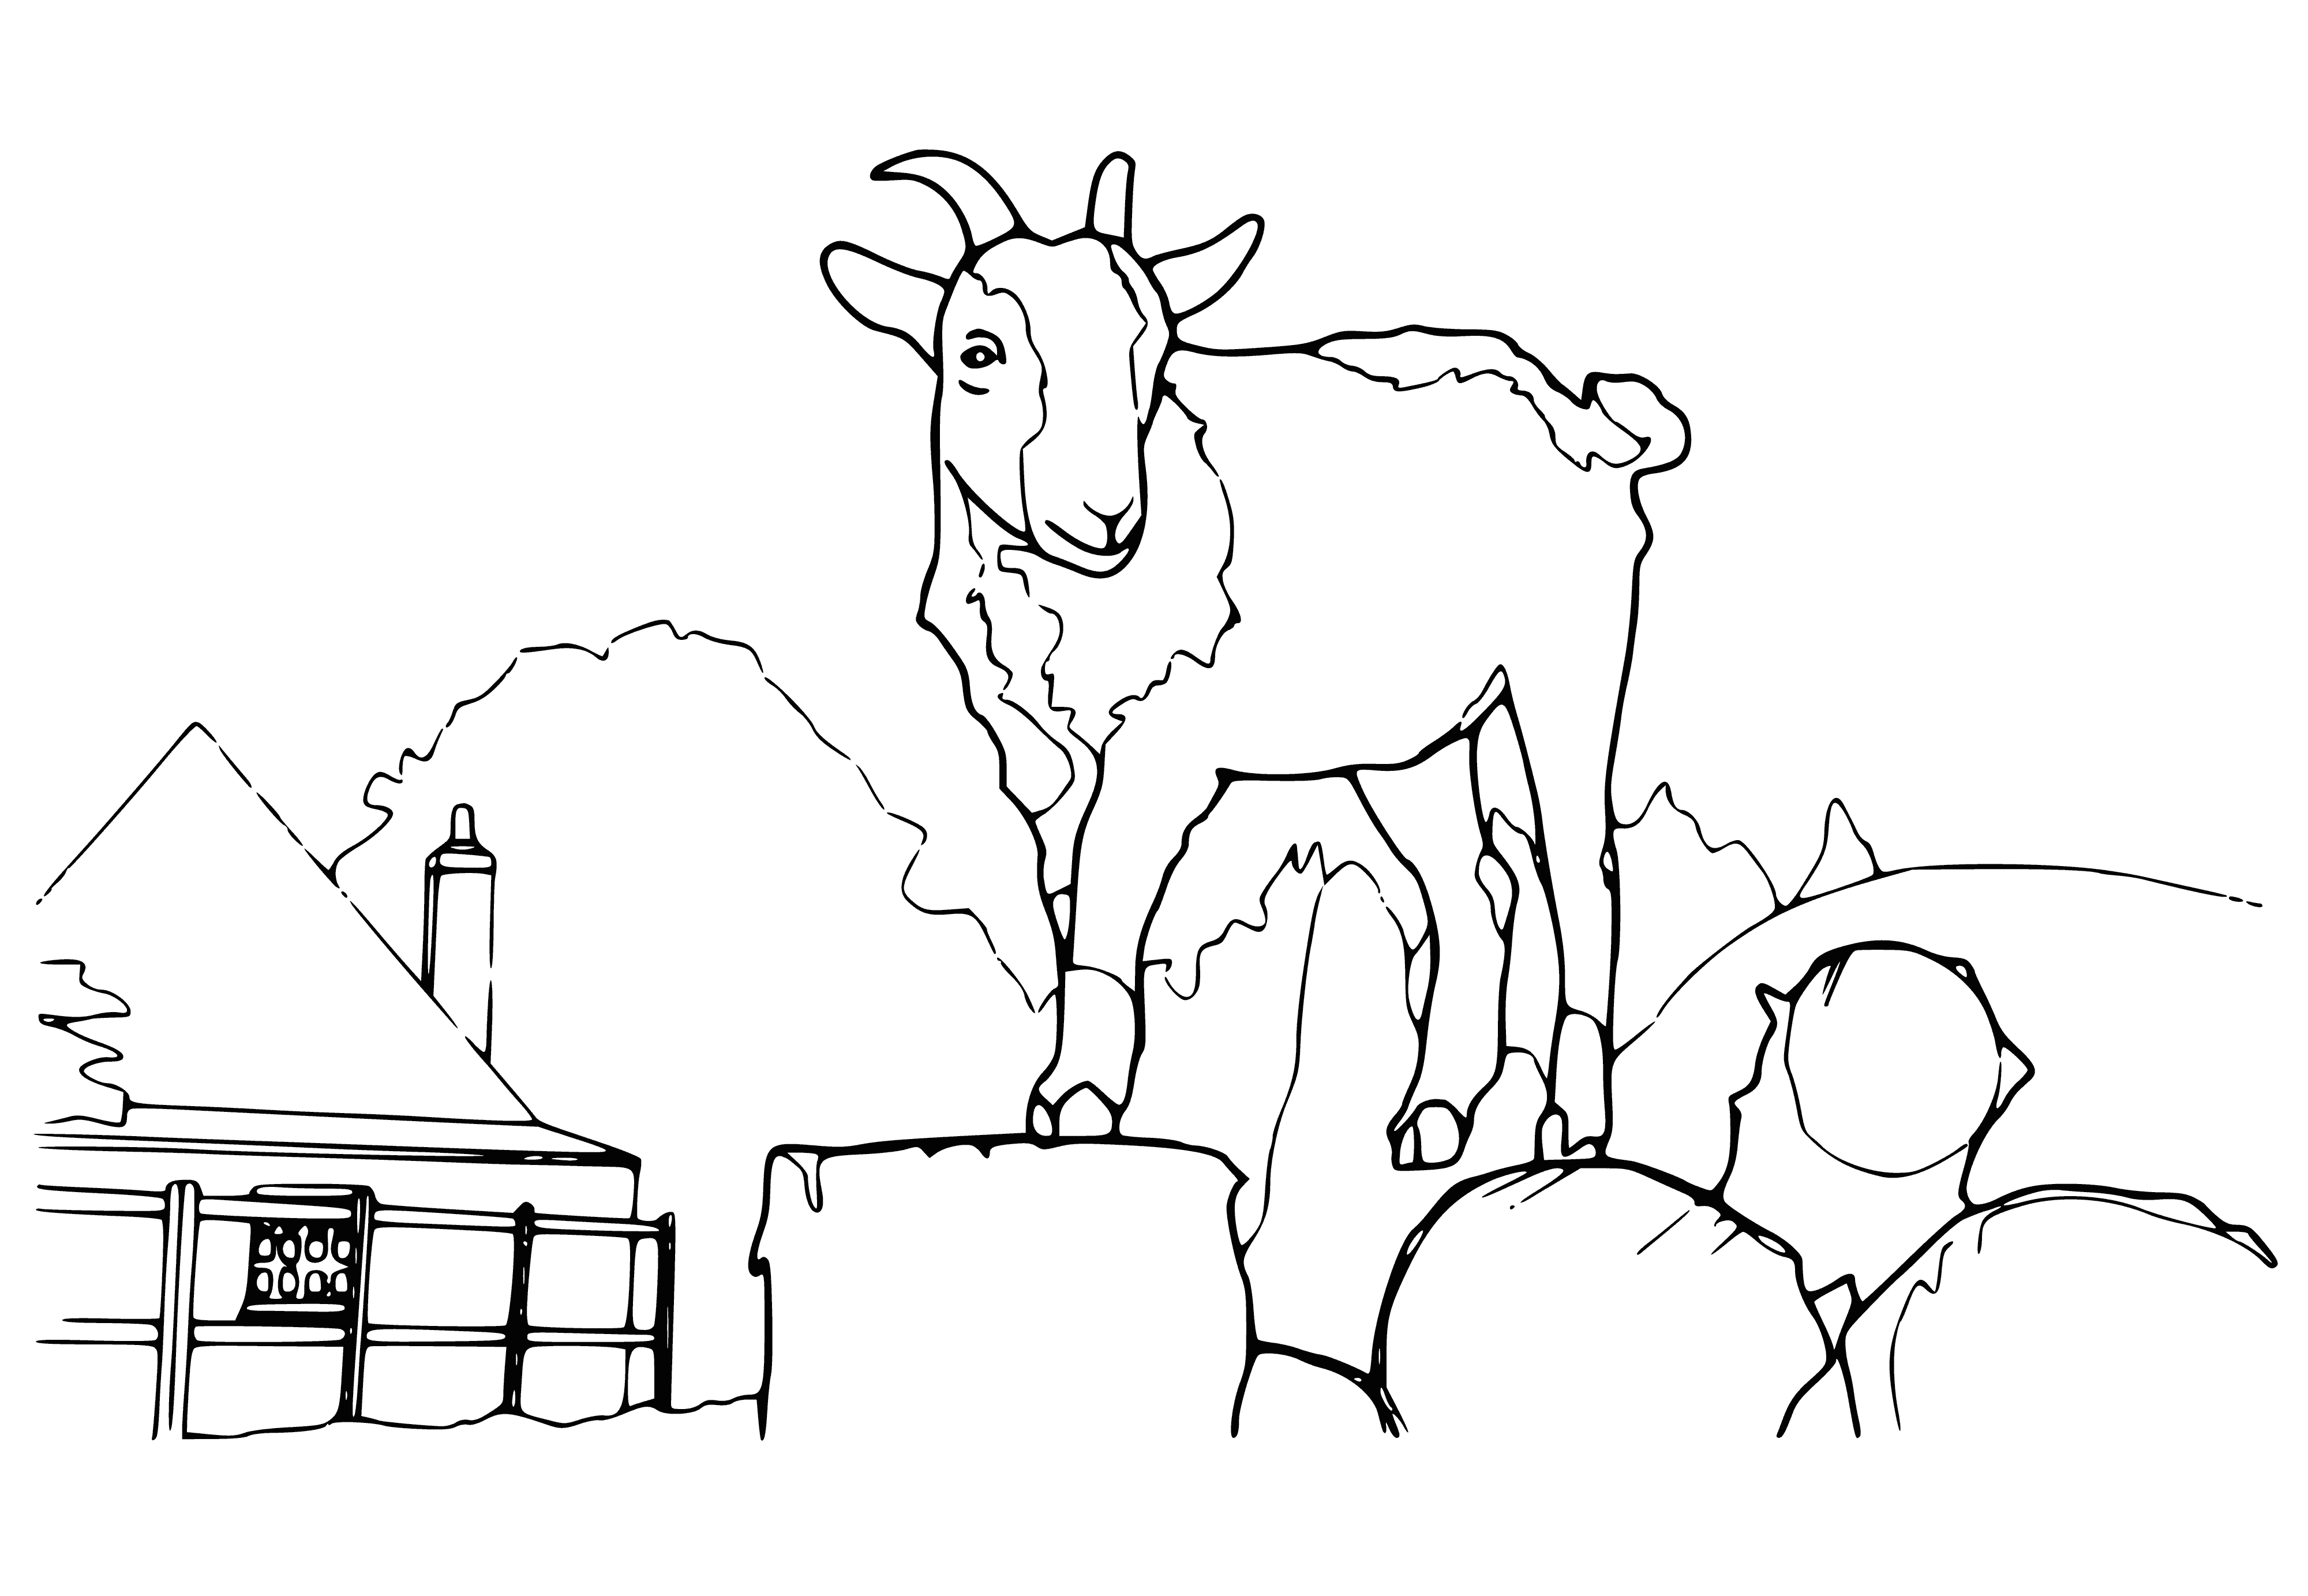 coloring page: Mountain goat with furry coat, curved horns, & dark beard stands atop a rocky outcropping, observing the view with long legs & black hooves.